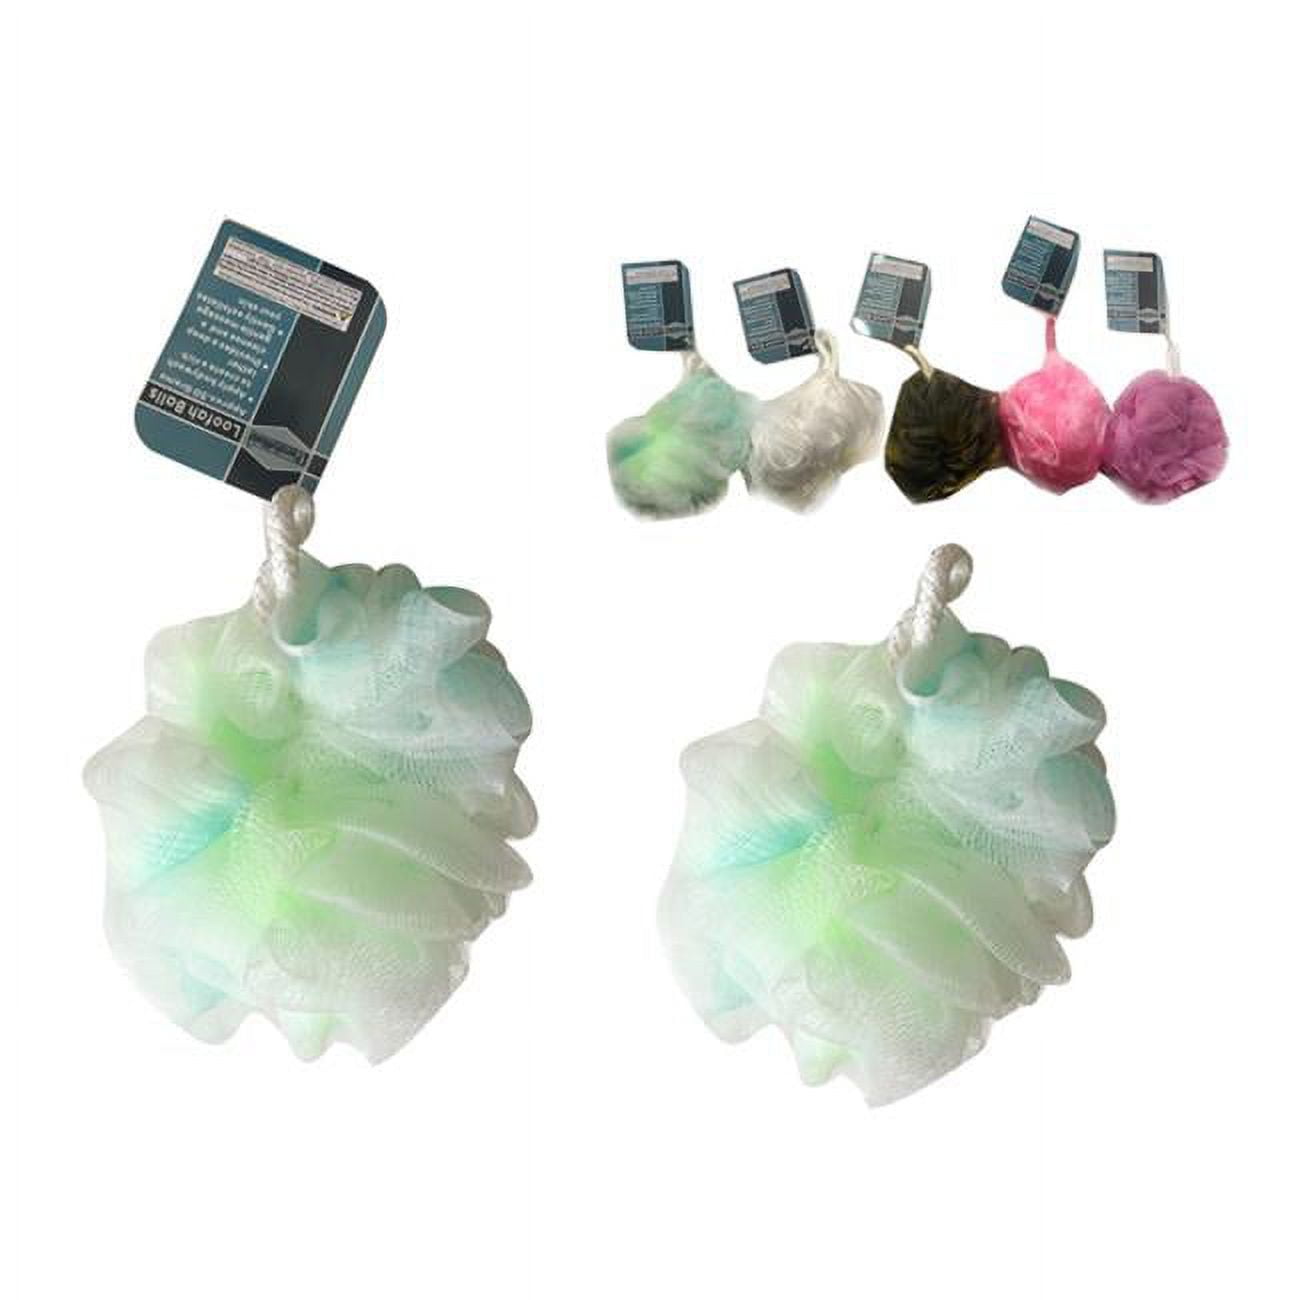 UPC 724086000067 product image for 17129 50 gm Loofah Ball, Assorted Color - Pack of 144 | upcitemdb.com